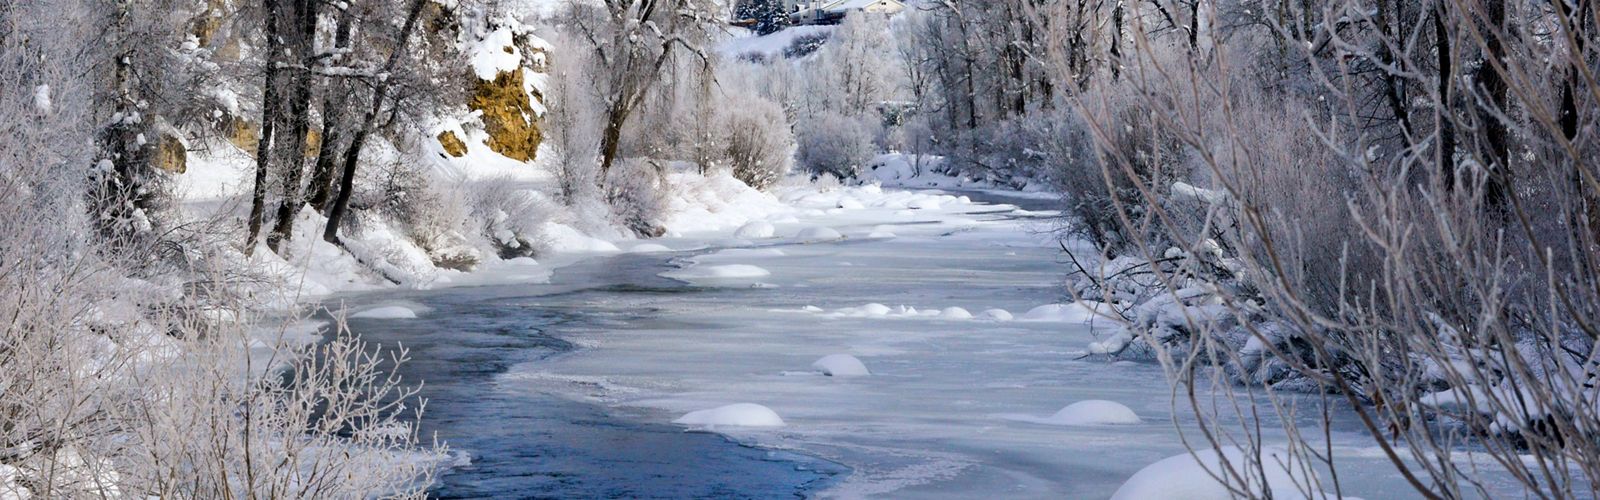 Yampa River in snow. 